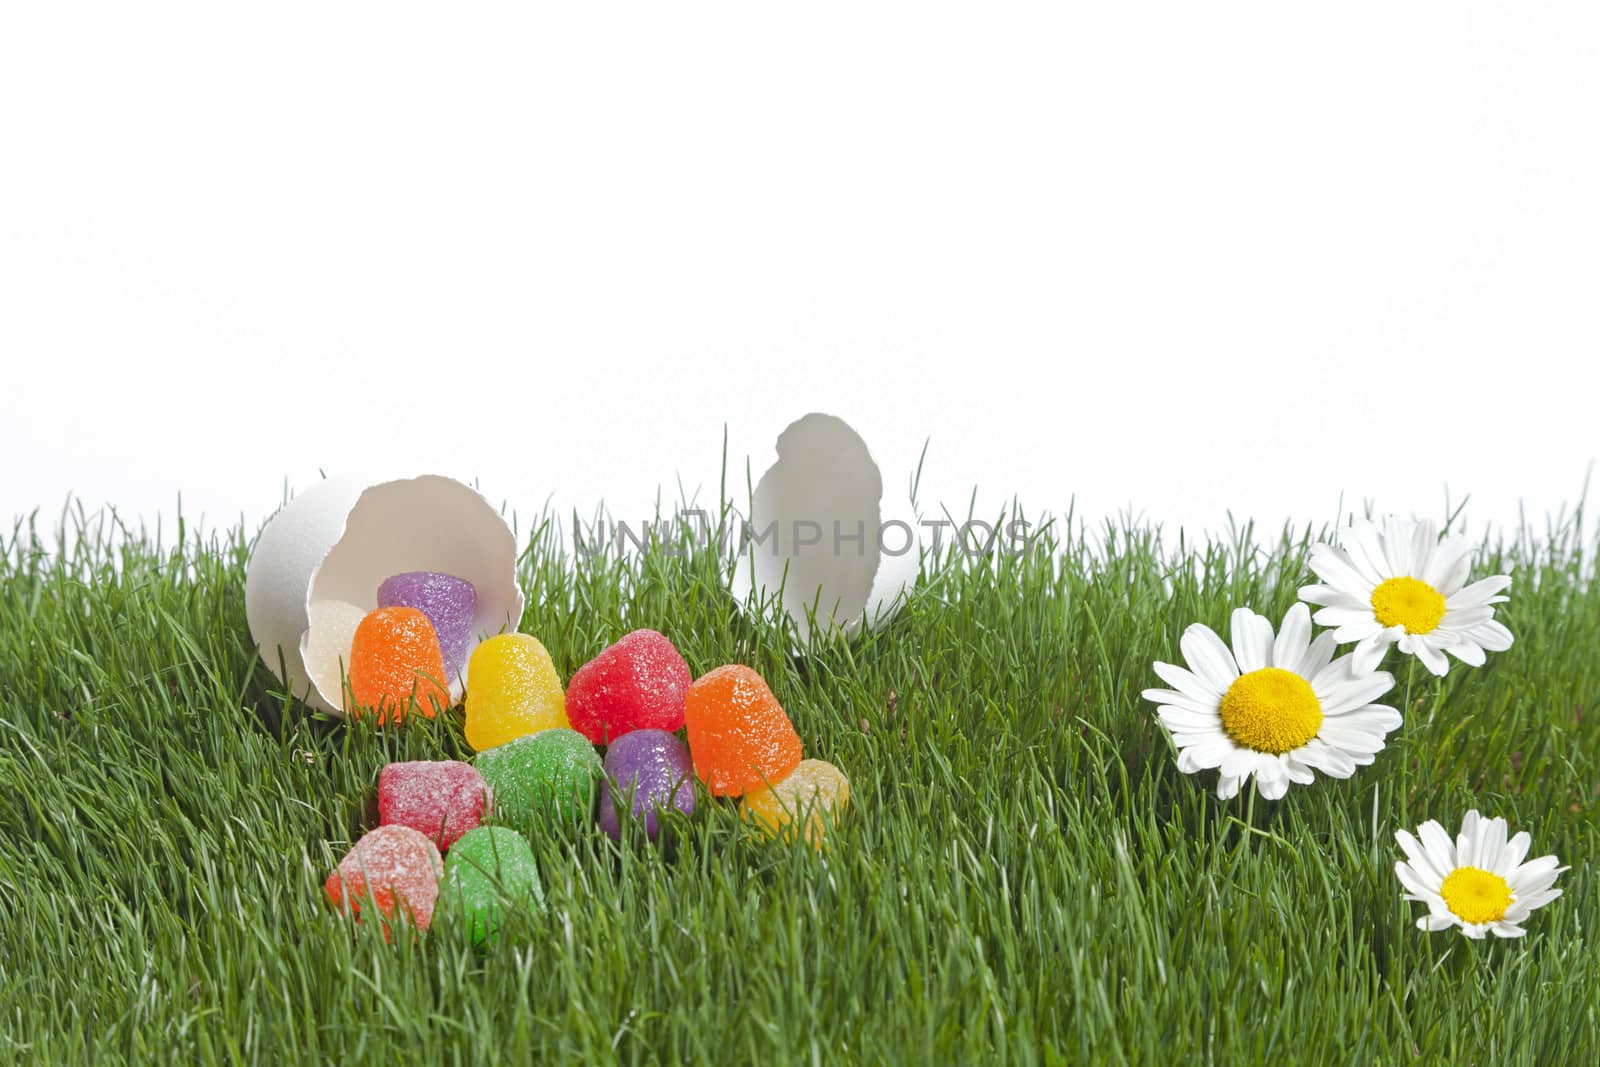 Sweet gummy candies spill out of an egg on a patch of grass against a white background.